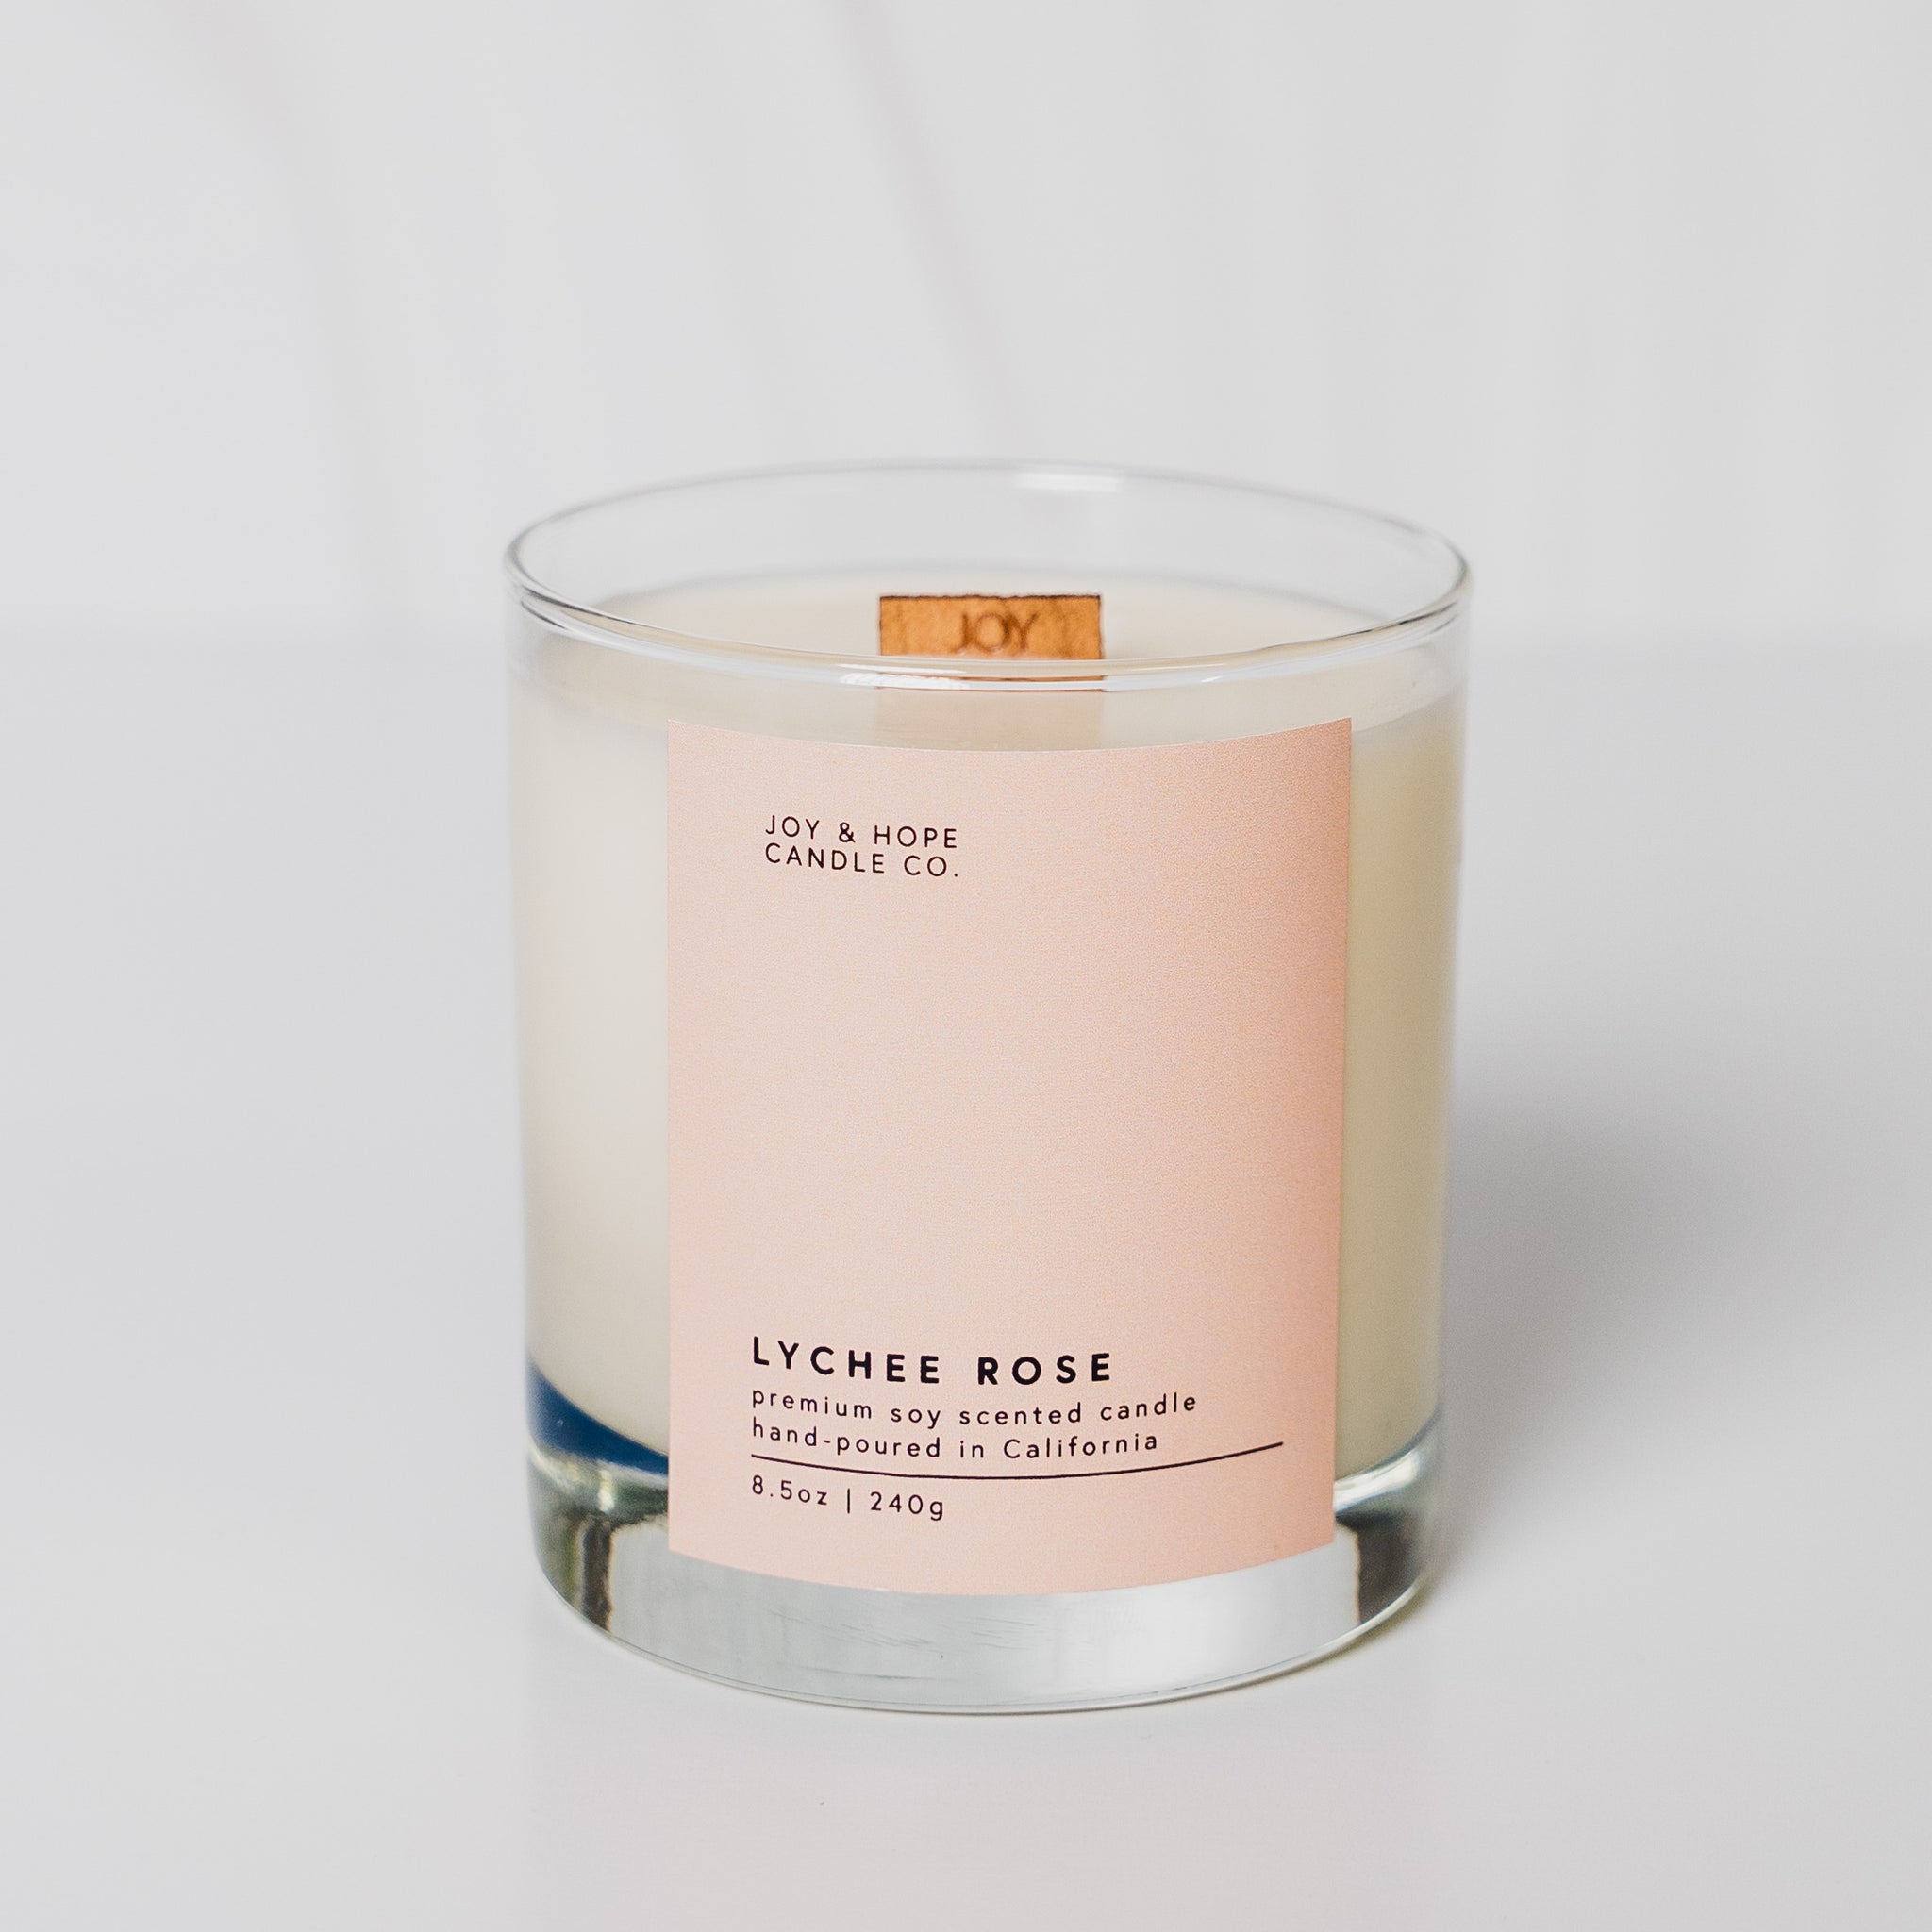 Lychee Rose - Wood Wick Candle (8.5oz)